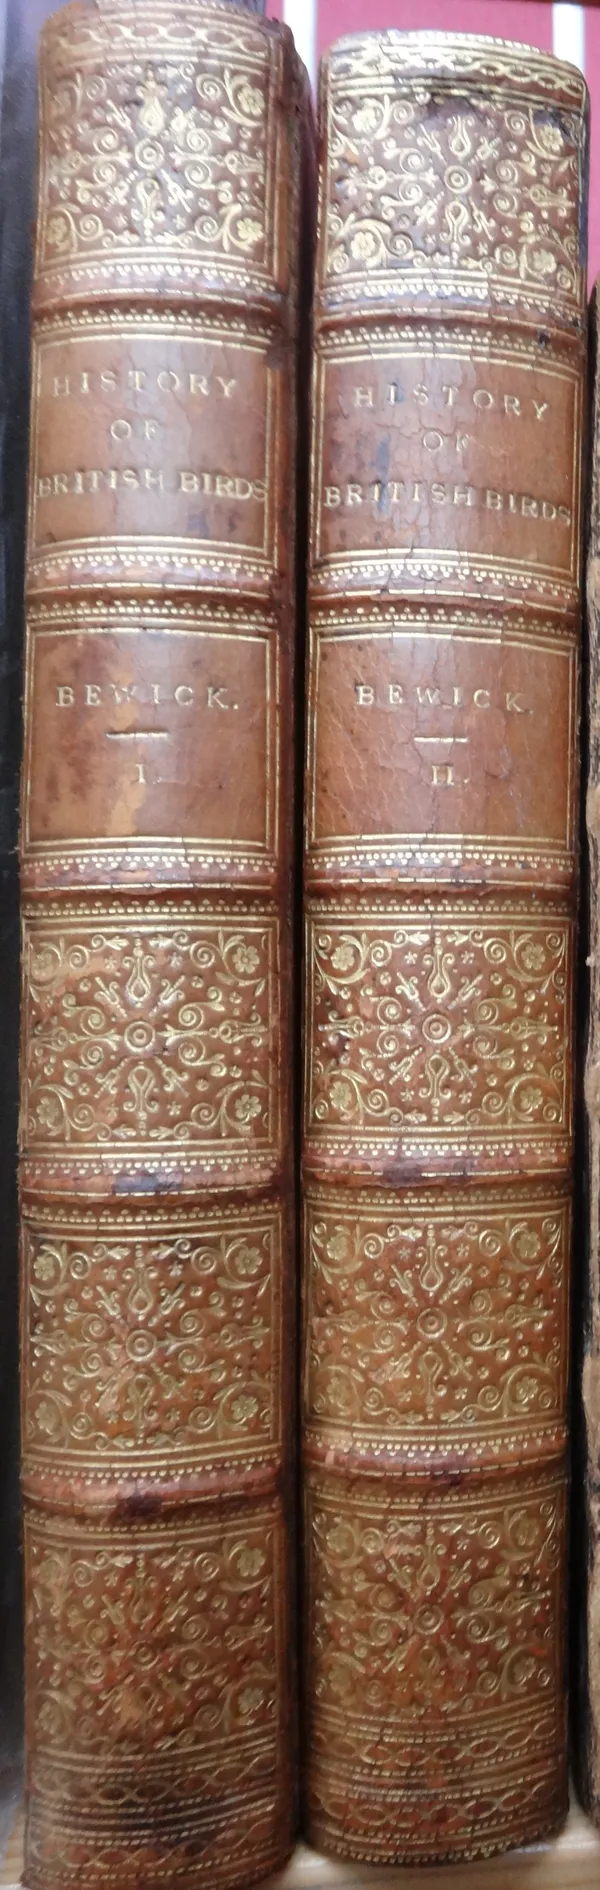 BEWICK (T.)  History of British Birds  . . .  (3rd & 1st editions), 2 vols. titles with pictorial vignette illus. & wood engraved illus. throughout (b